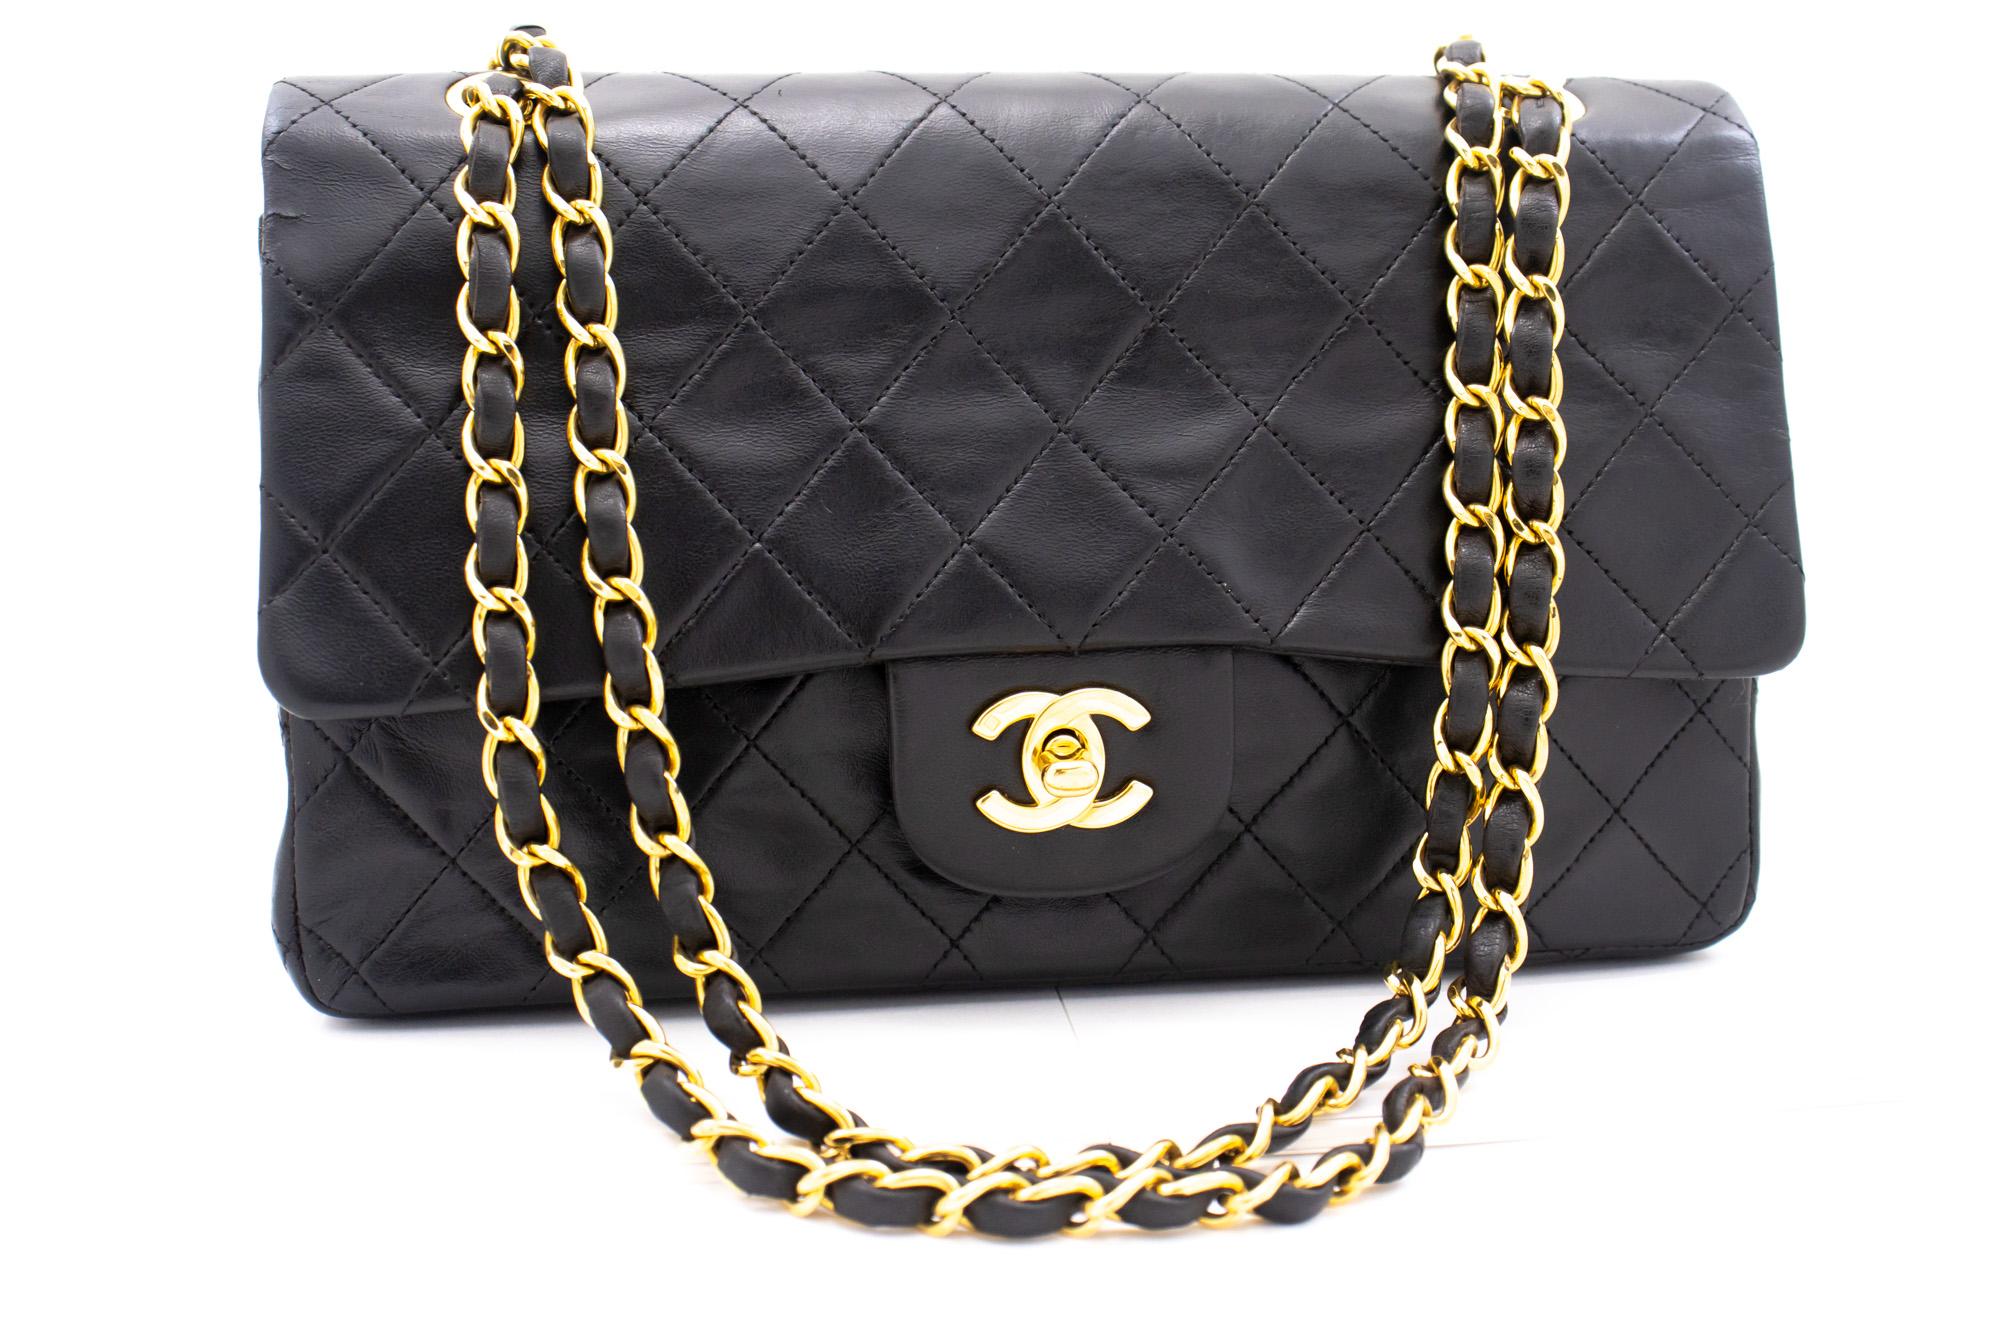 An authentic CHANEL Classic Double Flap Medium Chain Shoulder Bag Black Lamb. The color is Black. The outside material is Leather. The pattern is Solid. This item is Vintage / Classic. The year of manufacture would be 1997-1999.
Conditions &